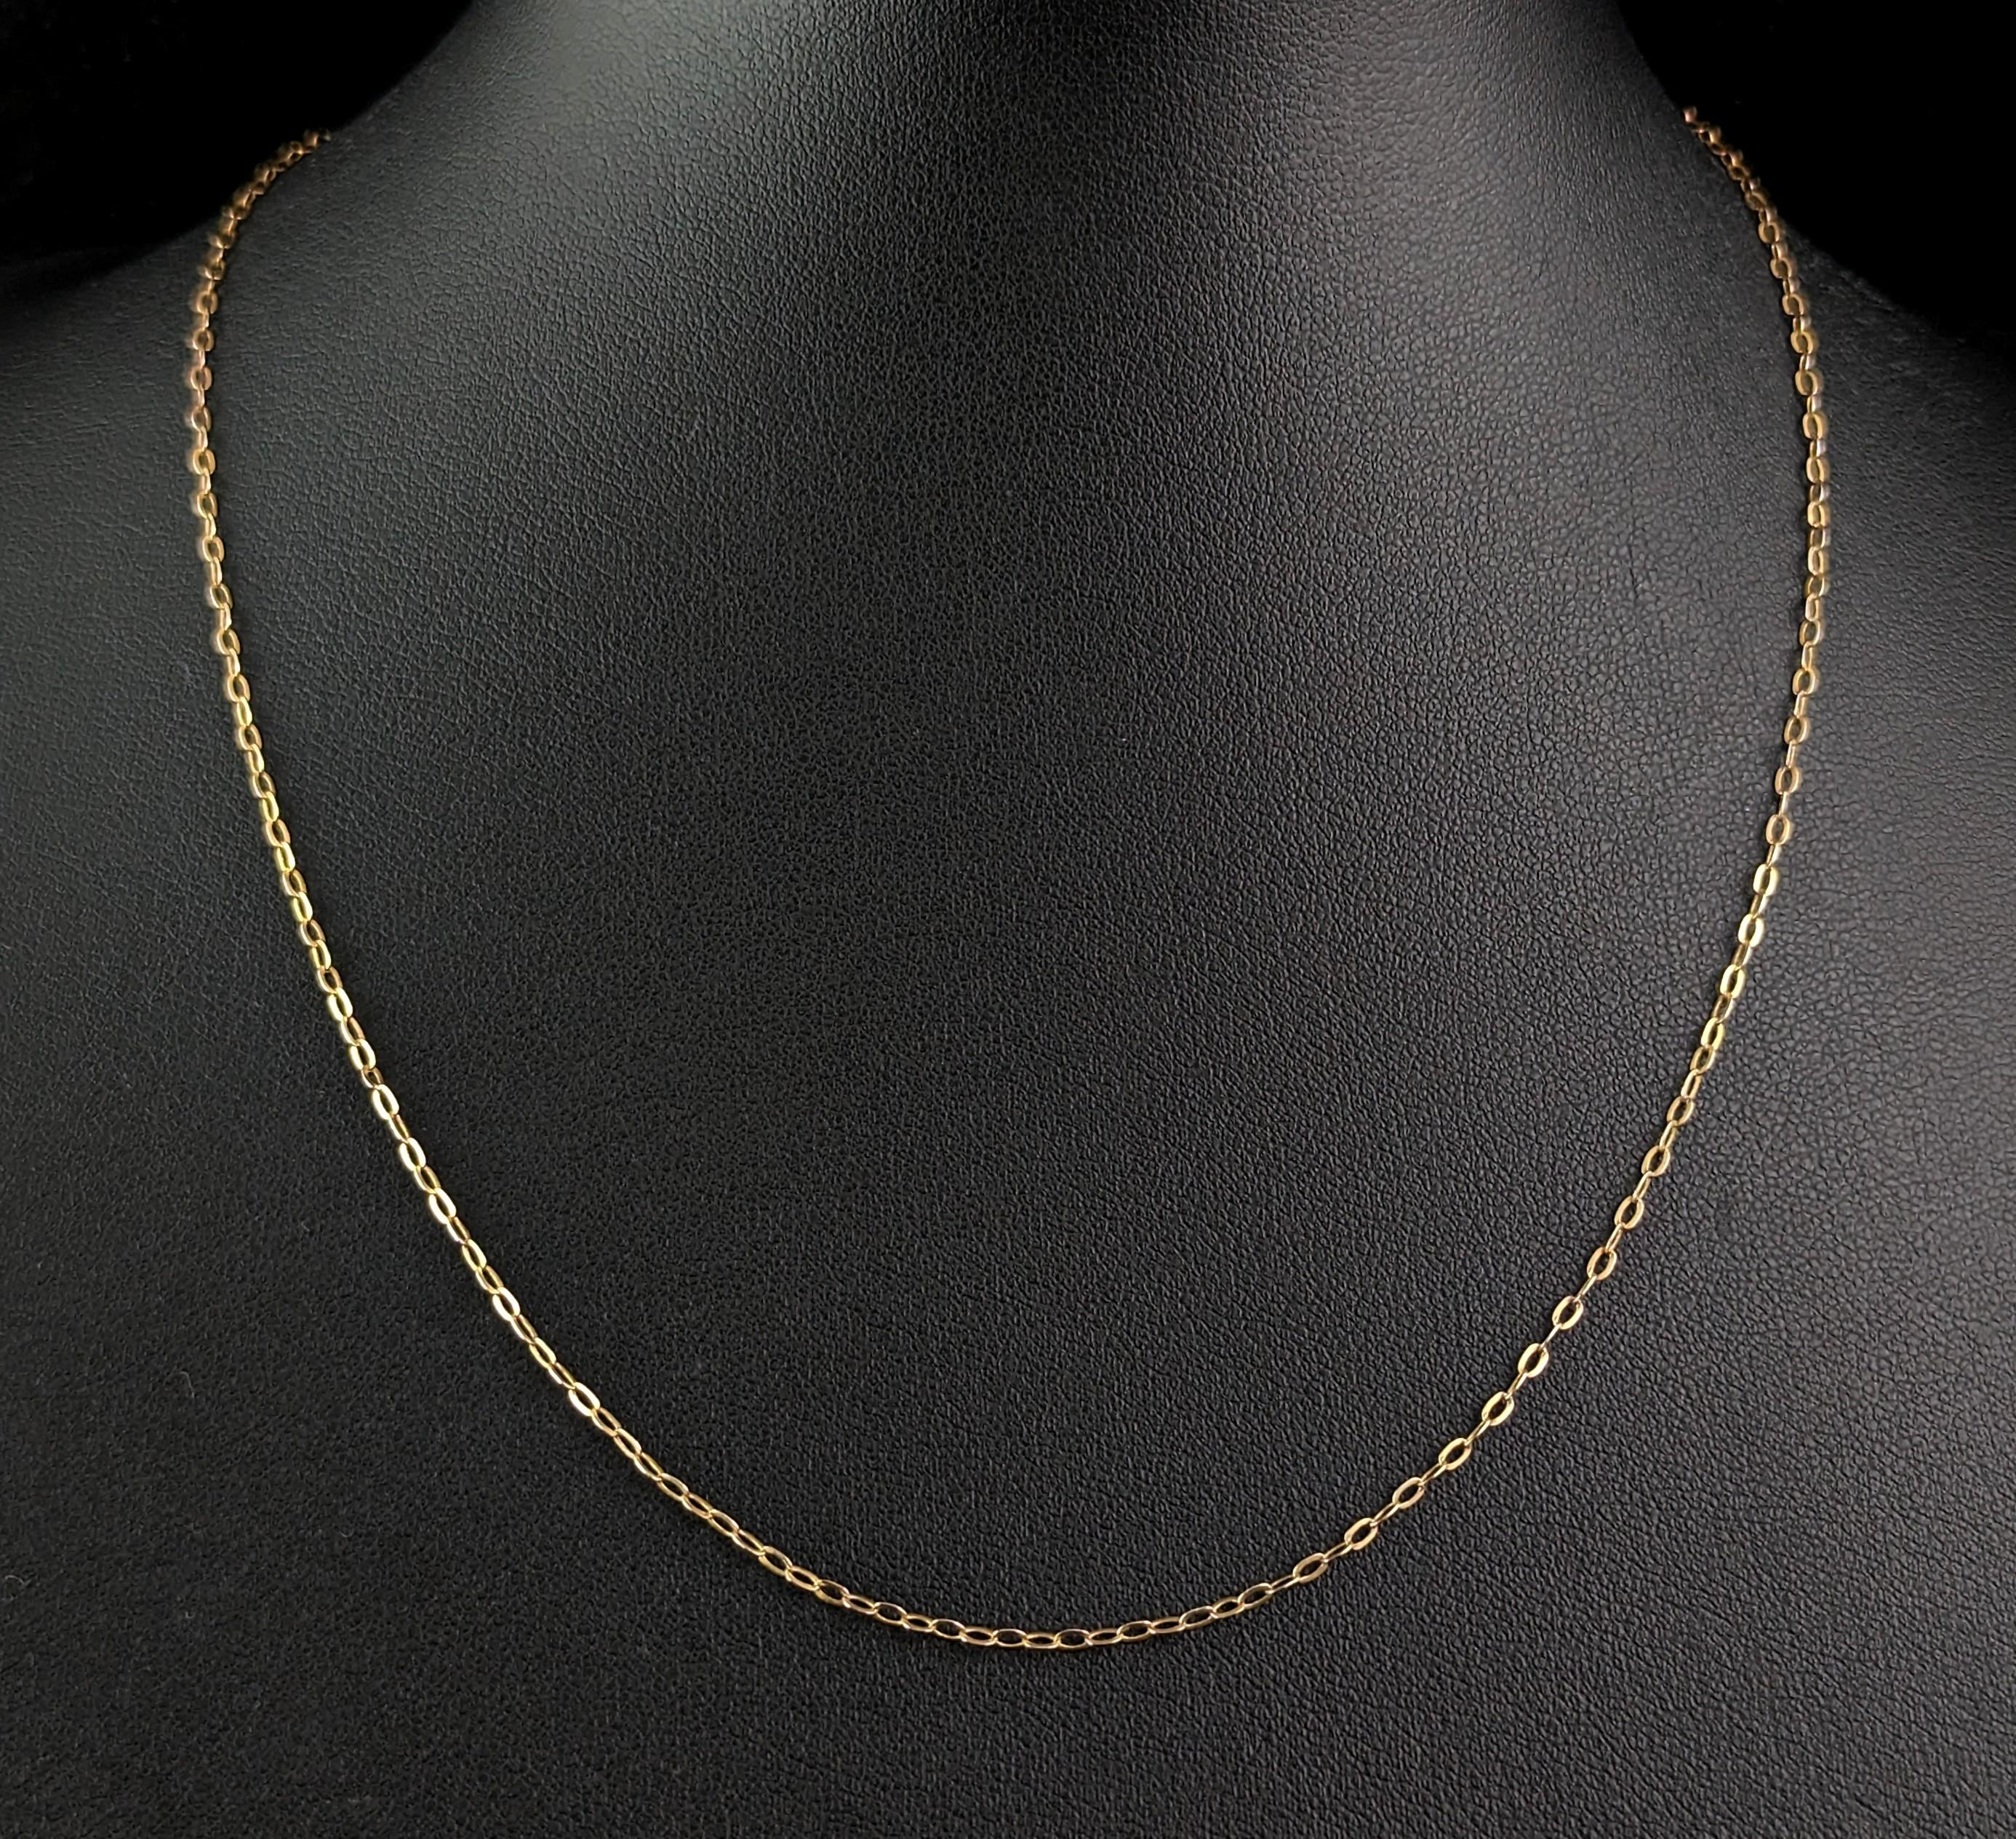 A fine dainty antique 9ct gold trace chain such as this is the perfect accompaniment to your favourite small lockets, pendants and charms.

It is a fine trace link in a rich yellow gold with a barrel clasp.

It is a good length and will work well